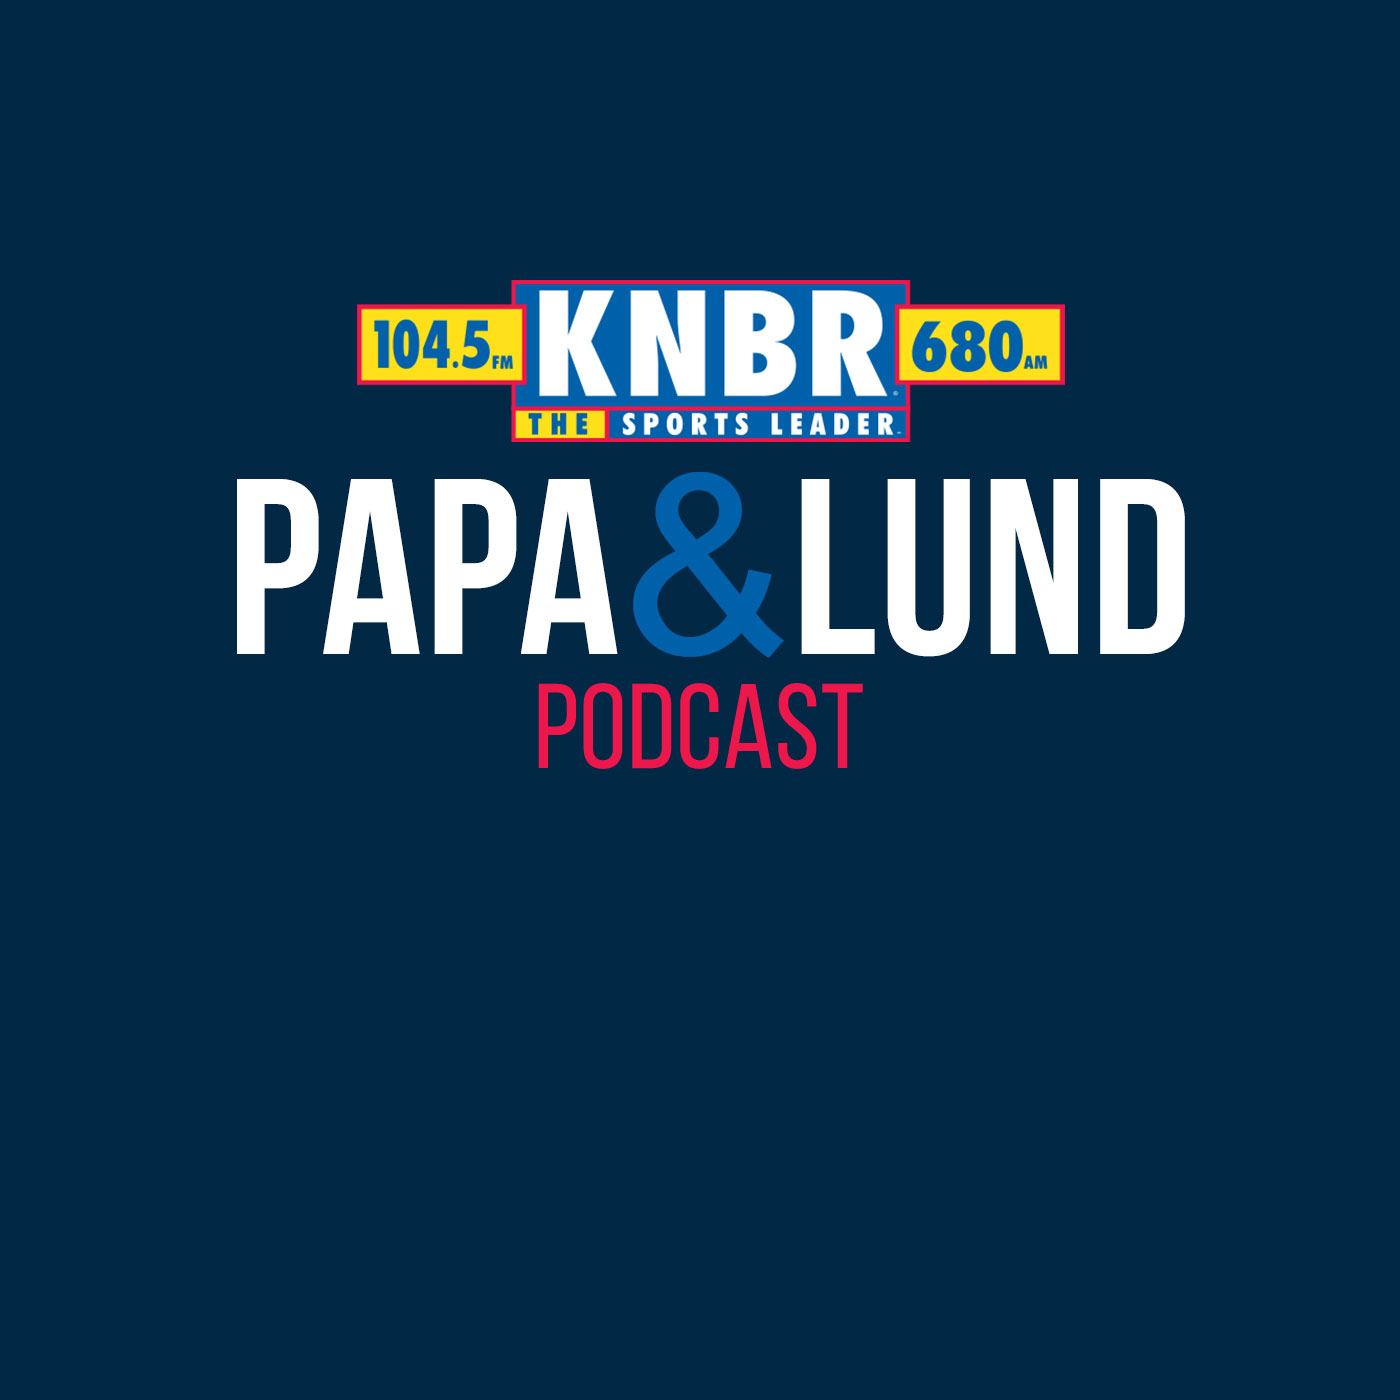 5-23 49ers President Al Guido joins Papa & Lund to discuss the exciting news of the 49ers being selected to host Superbowl 60 and some changes coming to Levis stadium